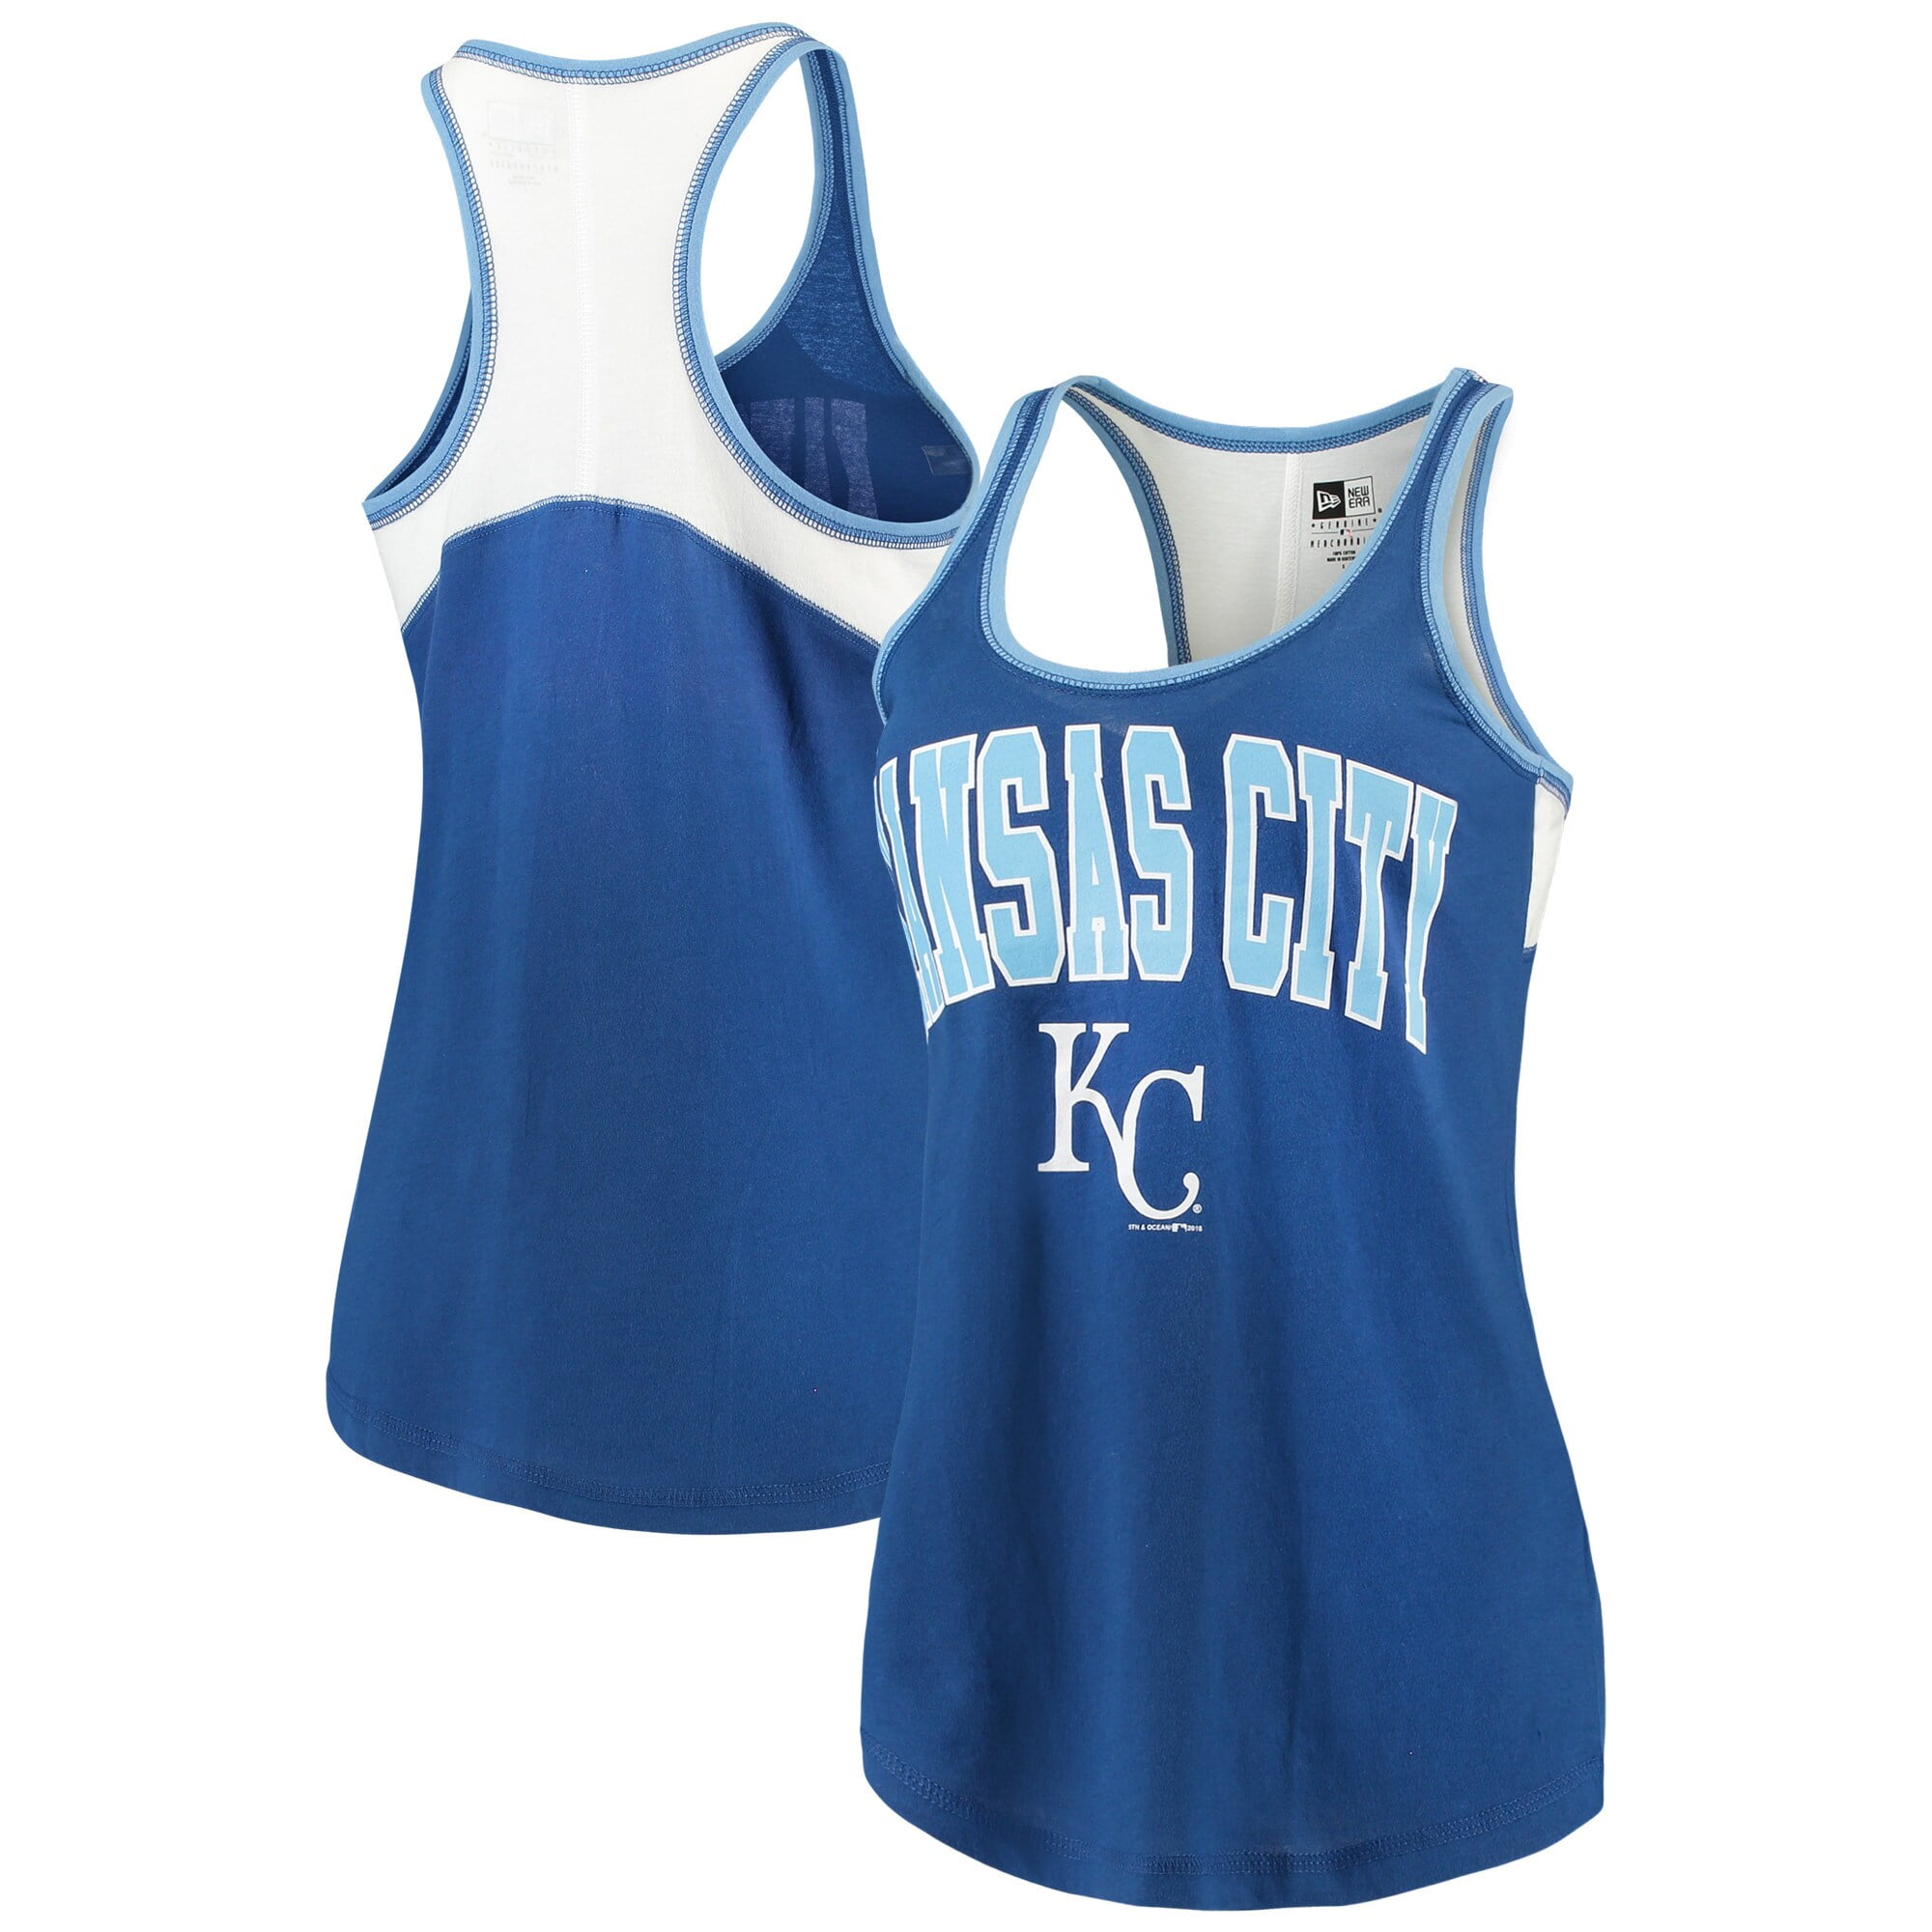 baby royals jersey